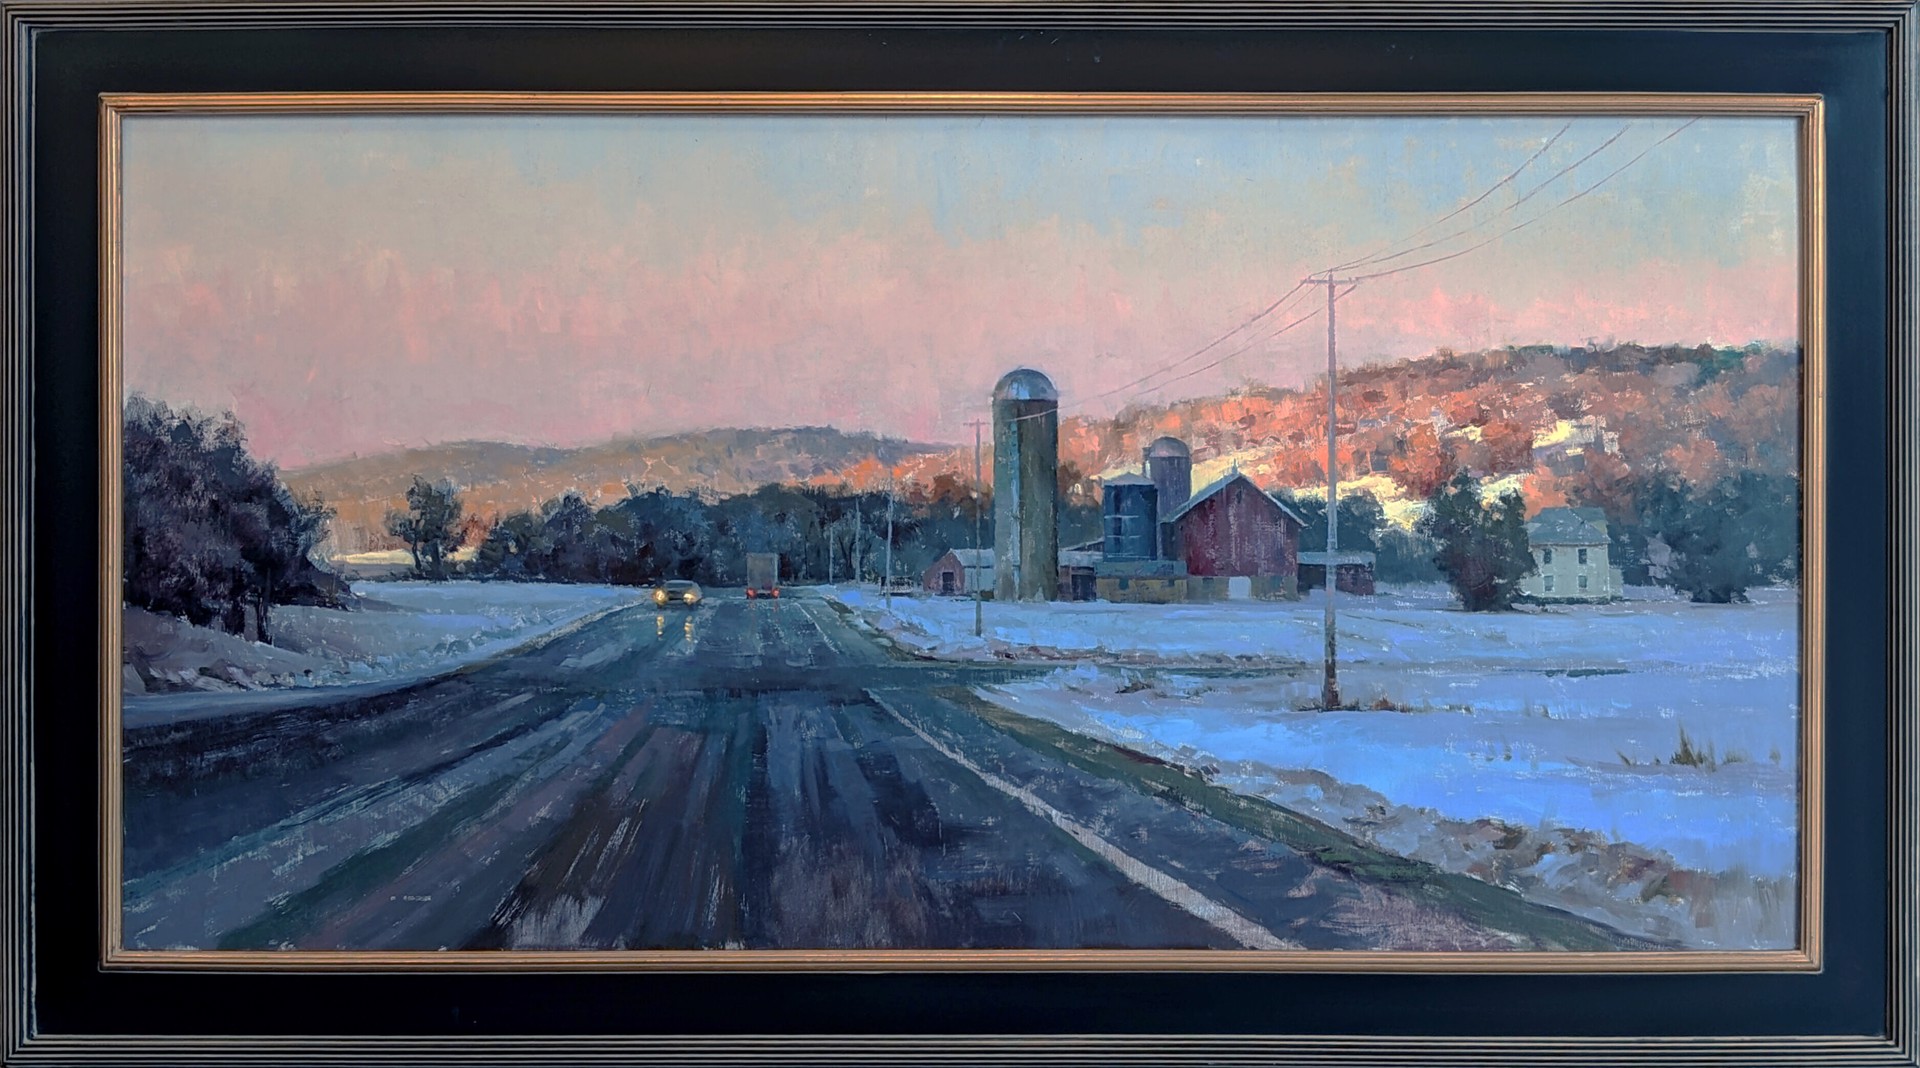 Driftless Farm Road by Marc Anderson